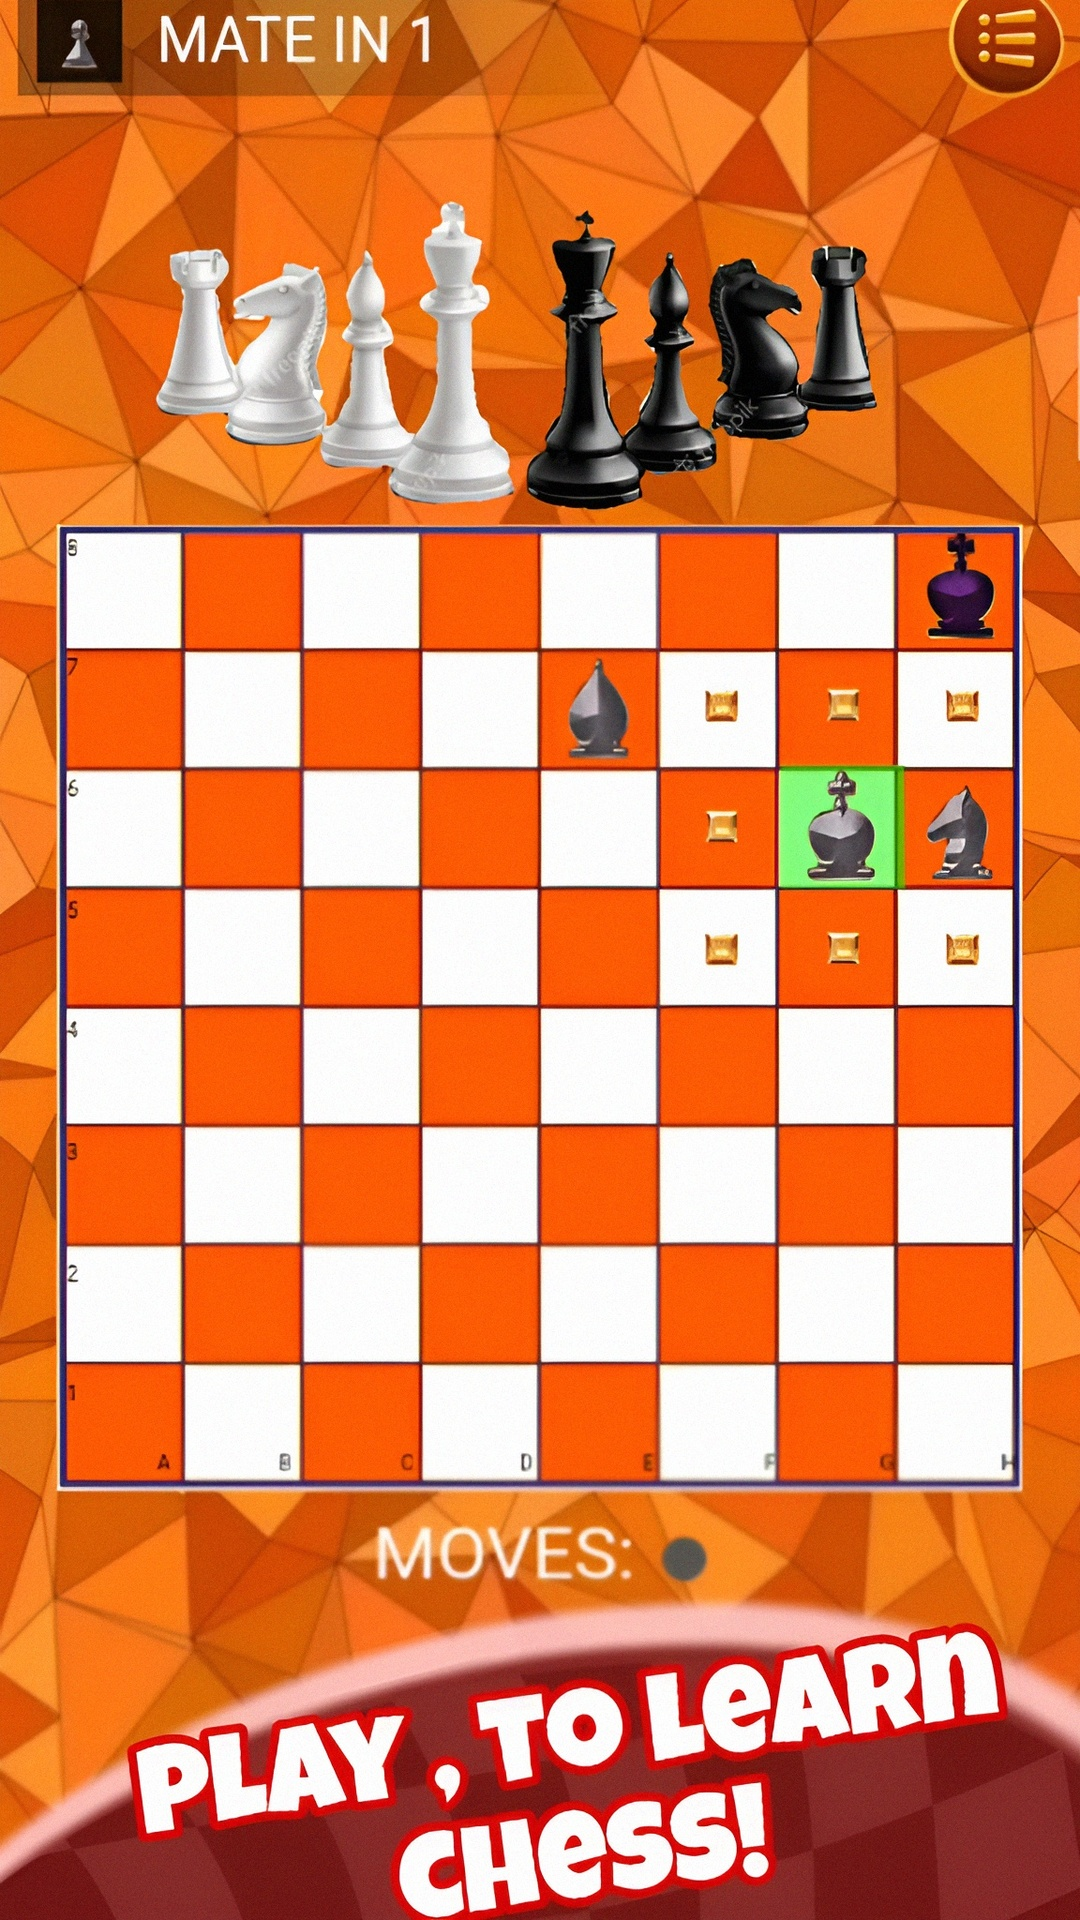 Mate in 1 Move: Chess Puzzle screenshot game